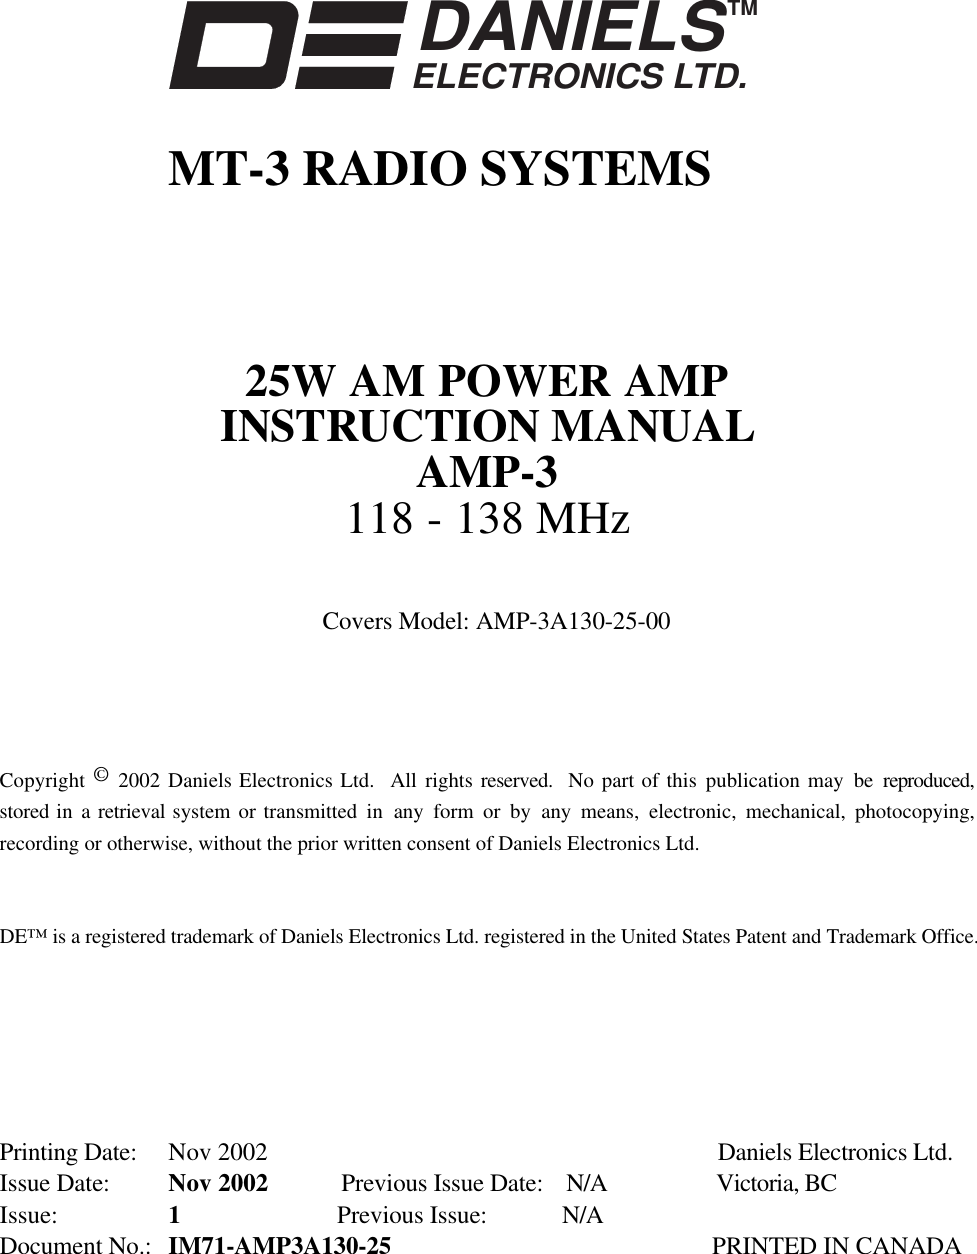 DANIELSELECTRONICS LTD.TMMT-3 RADIO SYSTEMS25W AM POWER AMPINSTRUCTION MANUALAMP-3118 - 138 MHzCovers Model: AMP-3A130-25-00Copyright © 2002 Daniels Electronics Ltd.  All rights reserved.  No part of this publication may be reproduced,stored in a retrieval system or transmitted in any form or by any means, electronic, mechanical, photocopying,recording or otherwise, without the prior written consent of Daniels Electronics Ltd.DE™ is a registered trademark of Daniels Electronics Ltd. registered in the United States Patent and Trademark Office.Printing Date: Nov 2002 Daniels Electronics Ltd.Issue Date: Nov 2002 Previous Issue Date: N/A Victoria, BCIssue: 1Previous Issue:  N/ADocument No.: IM71-AMP3A130-25 PRINTED IN CANADA